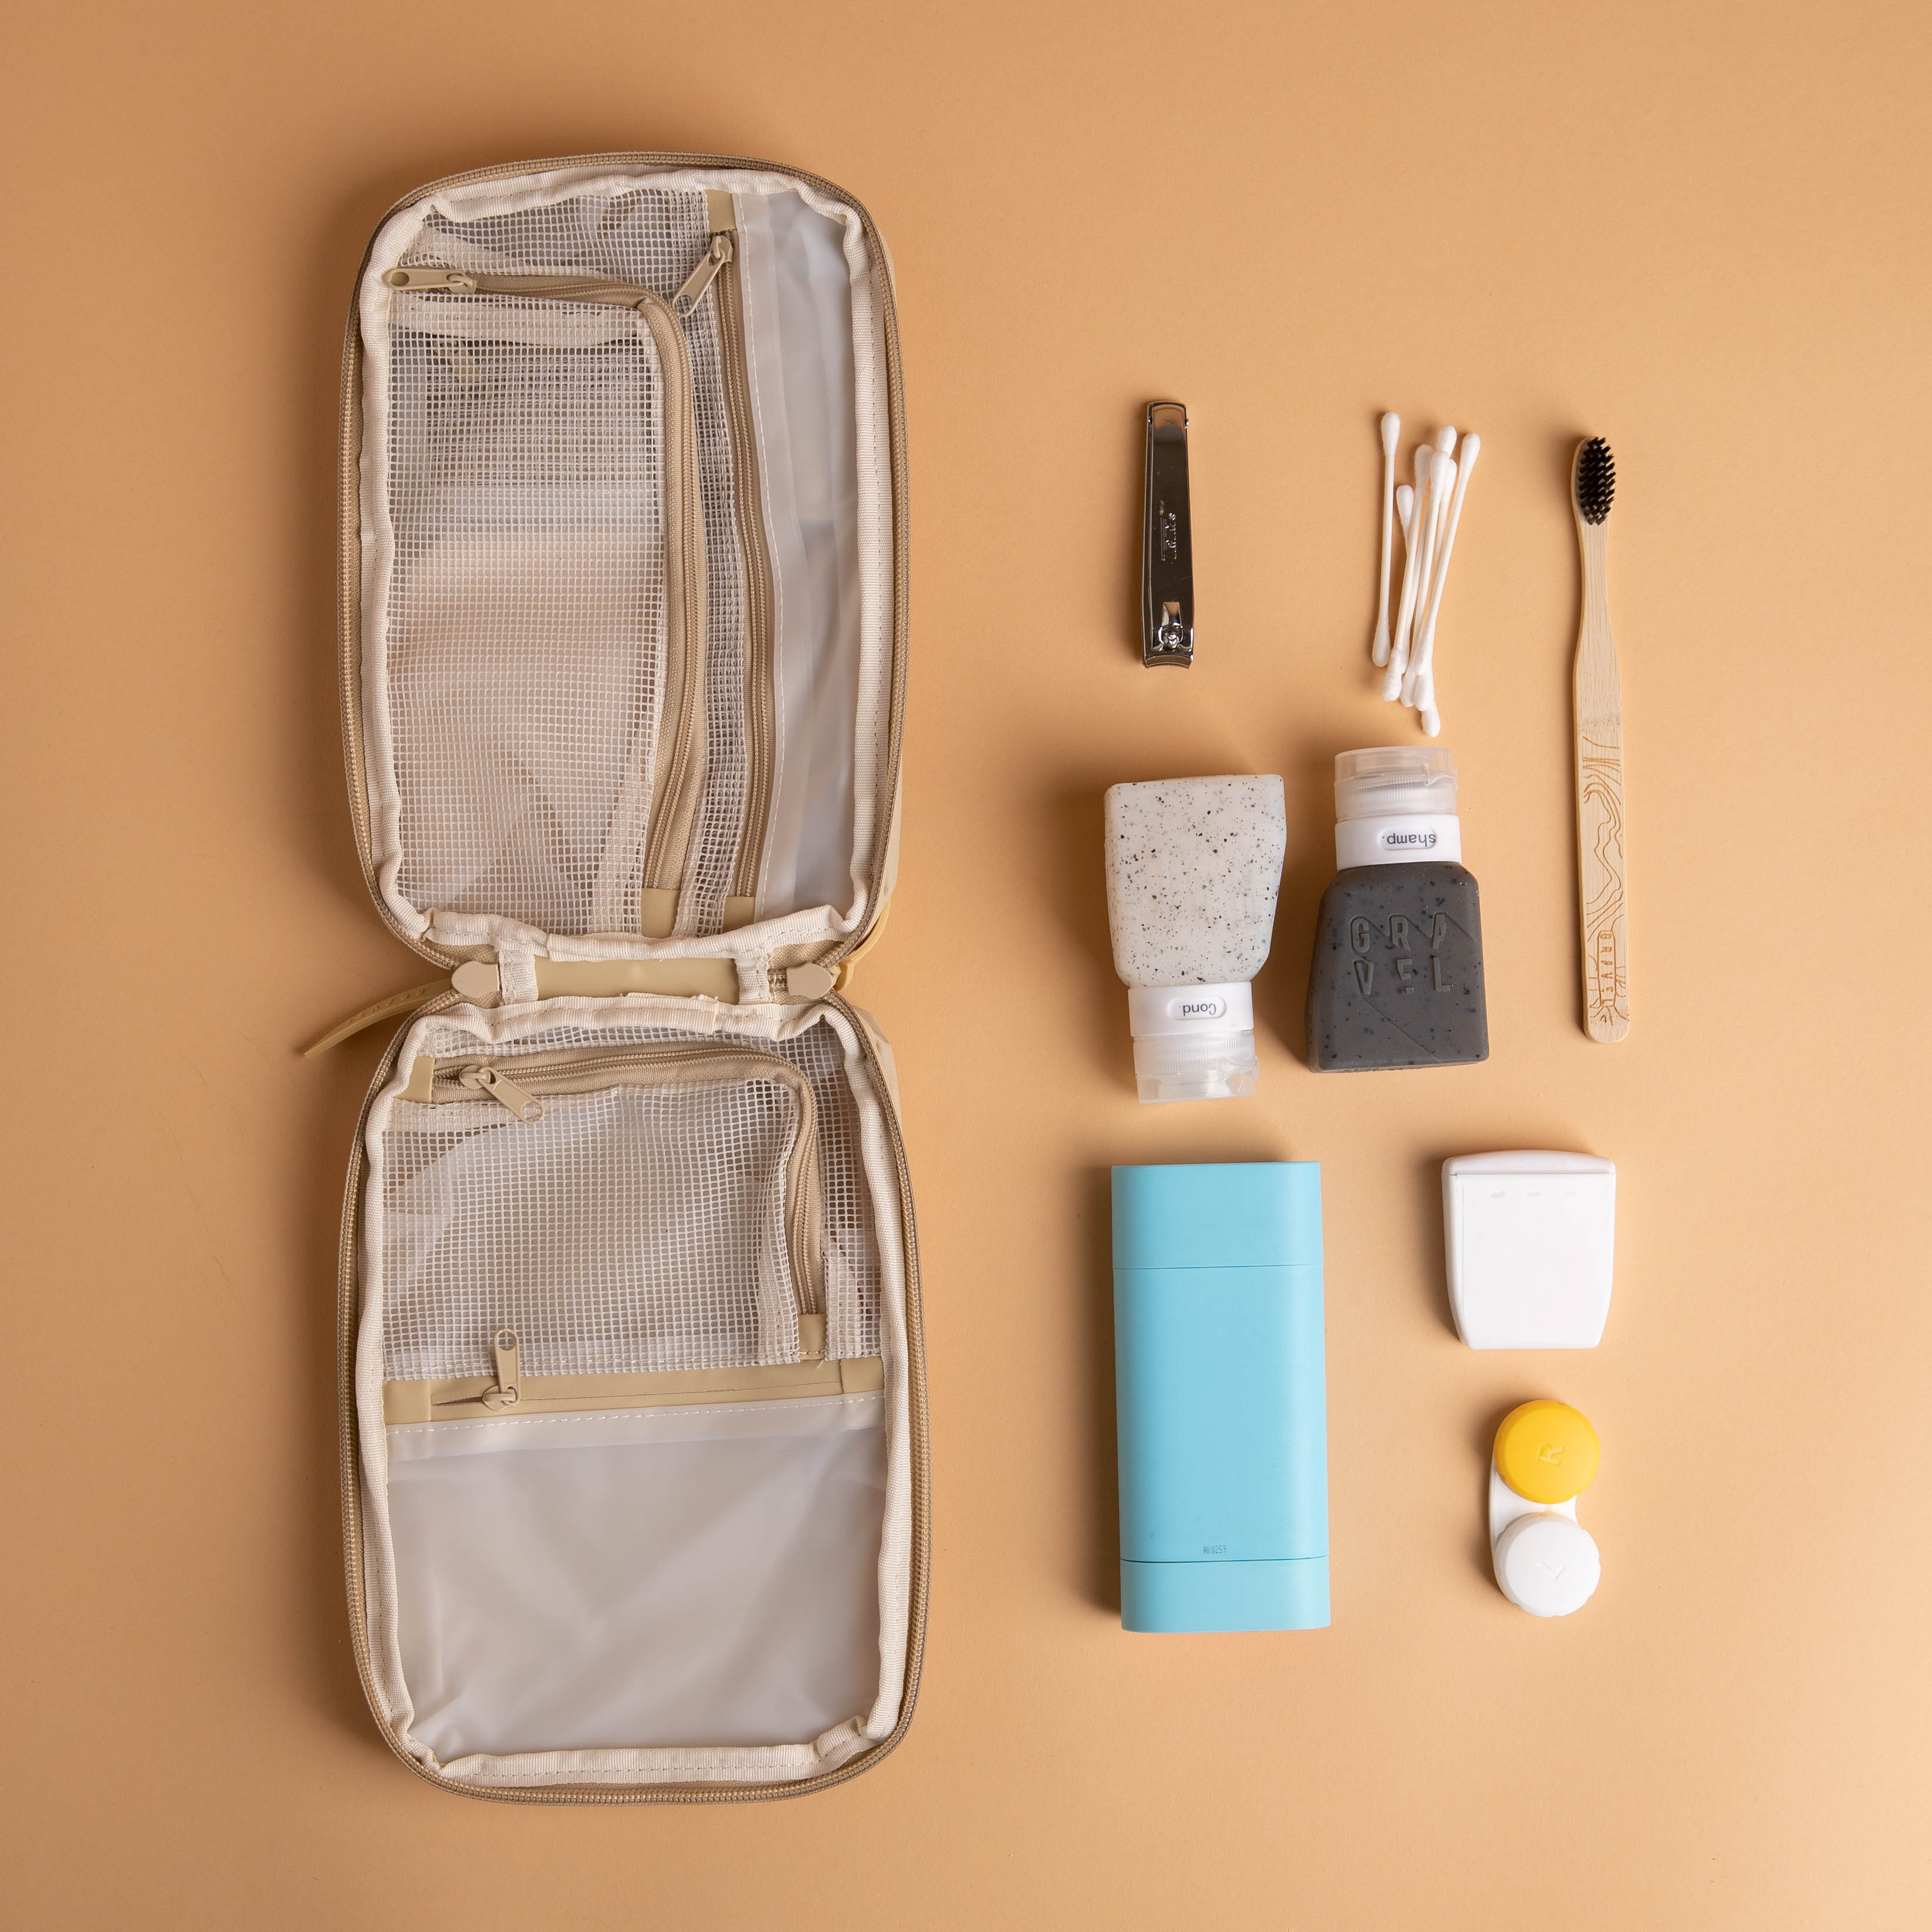 SIDE BY SIDE - TOILETRY BAG - TRAVEL PACKER LT